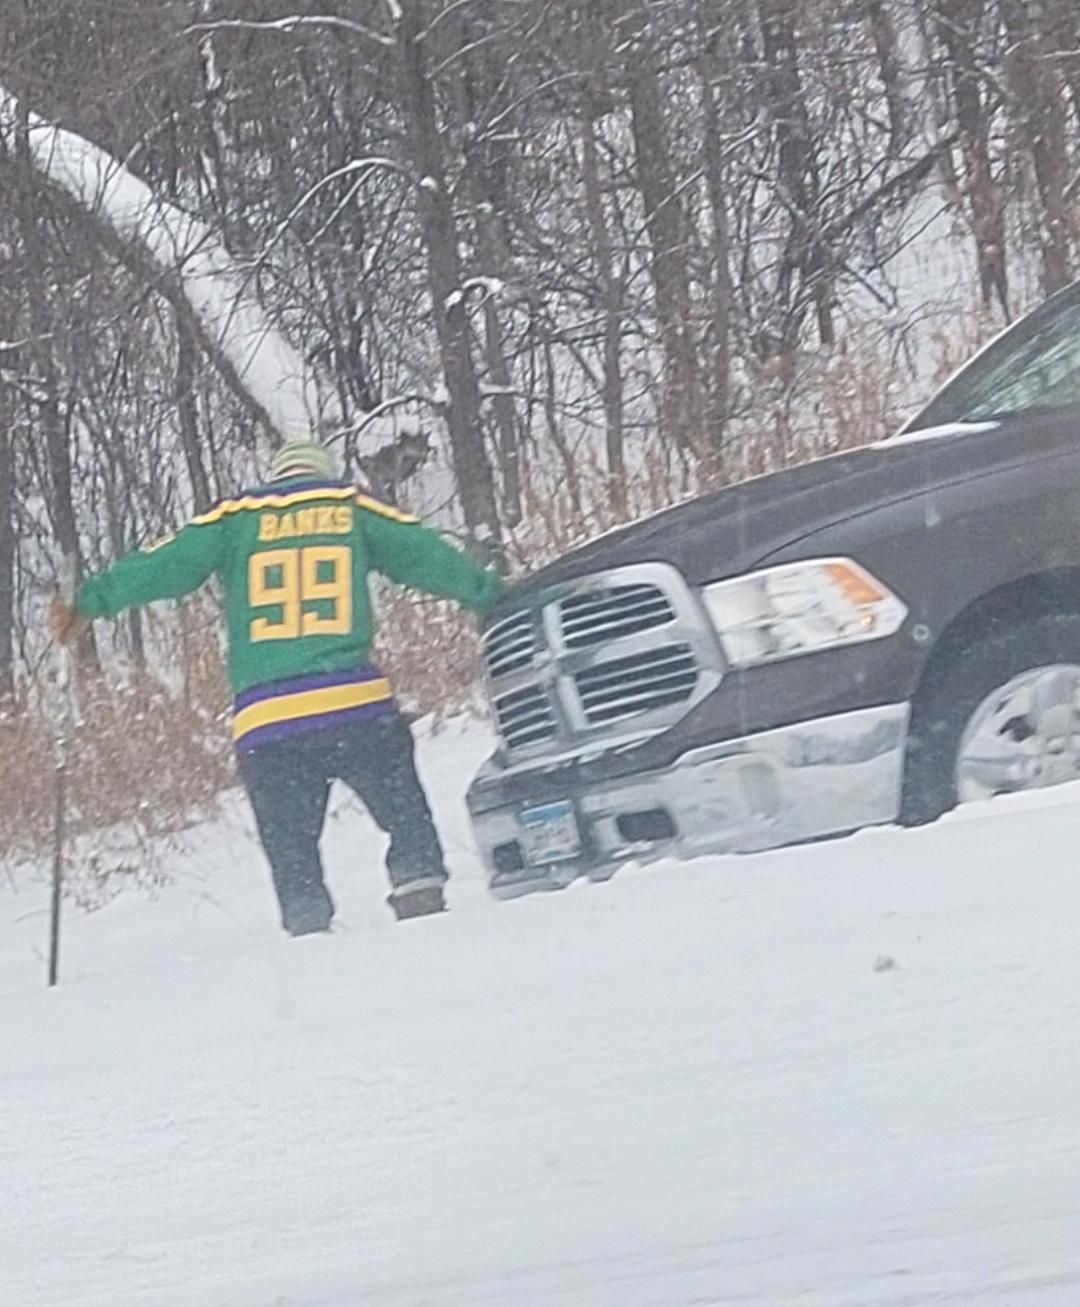 Passed a guy outside of Minneapolis on the freeway today. He spun out. This is him, wearing a hockey jersey, trying to dig his truck out with a hockey stick...only in Minnesota!